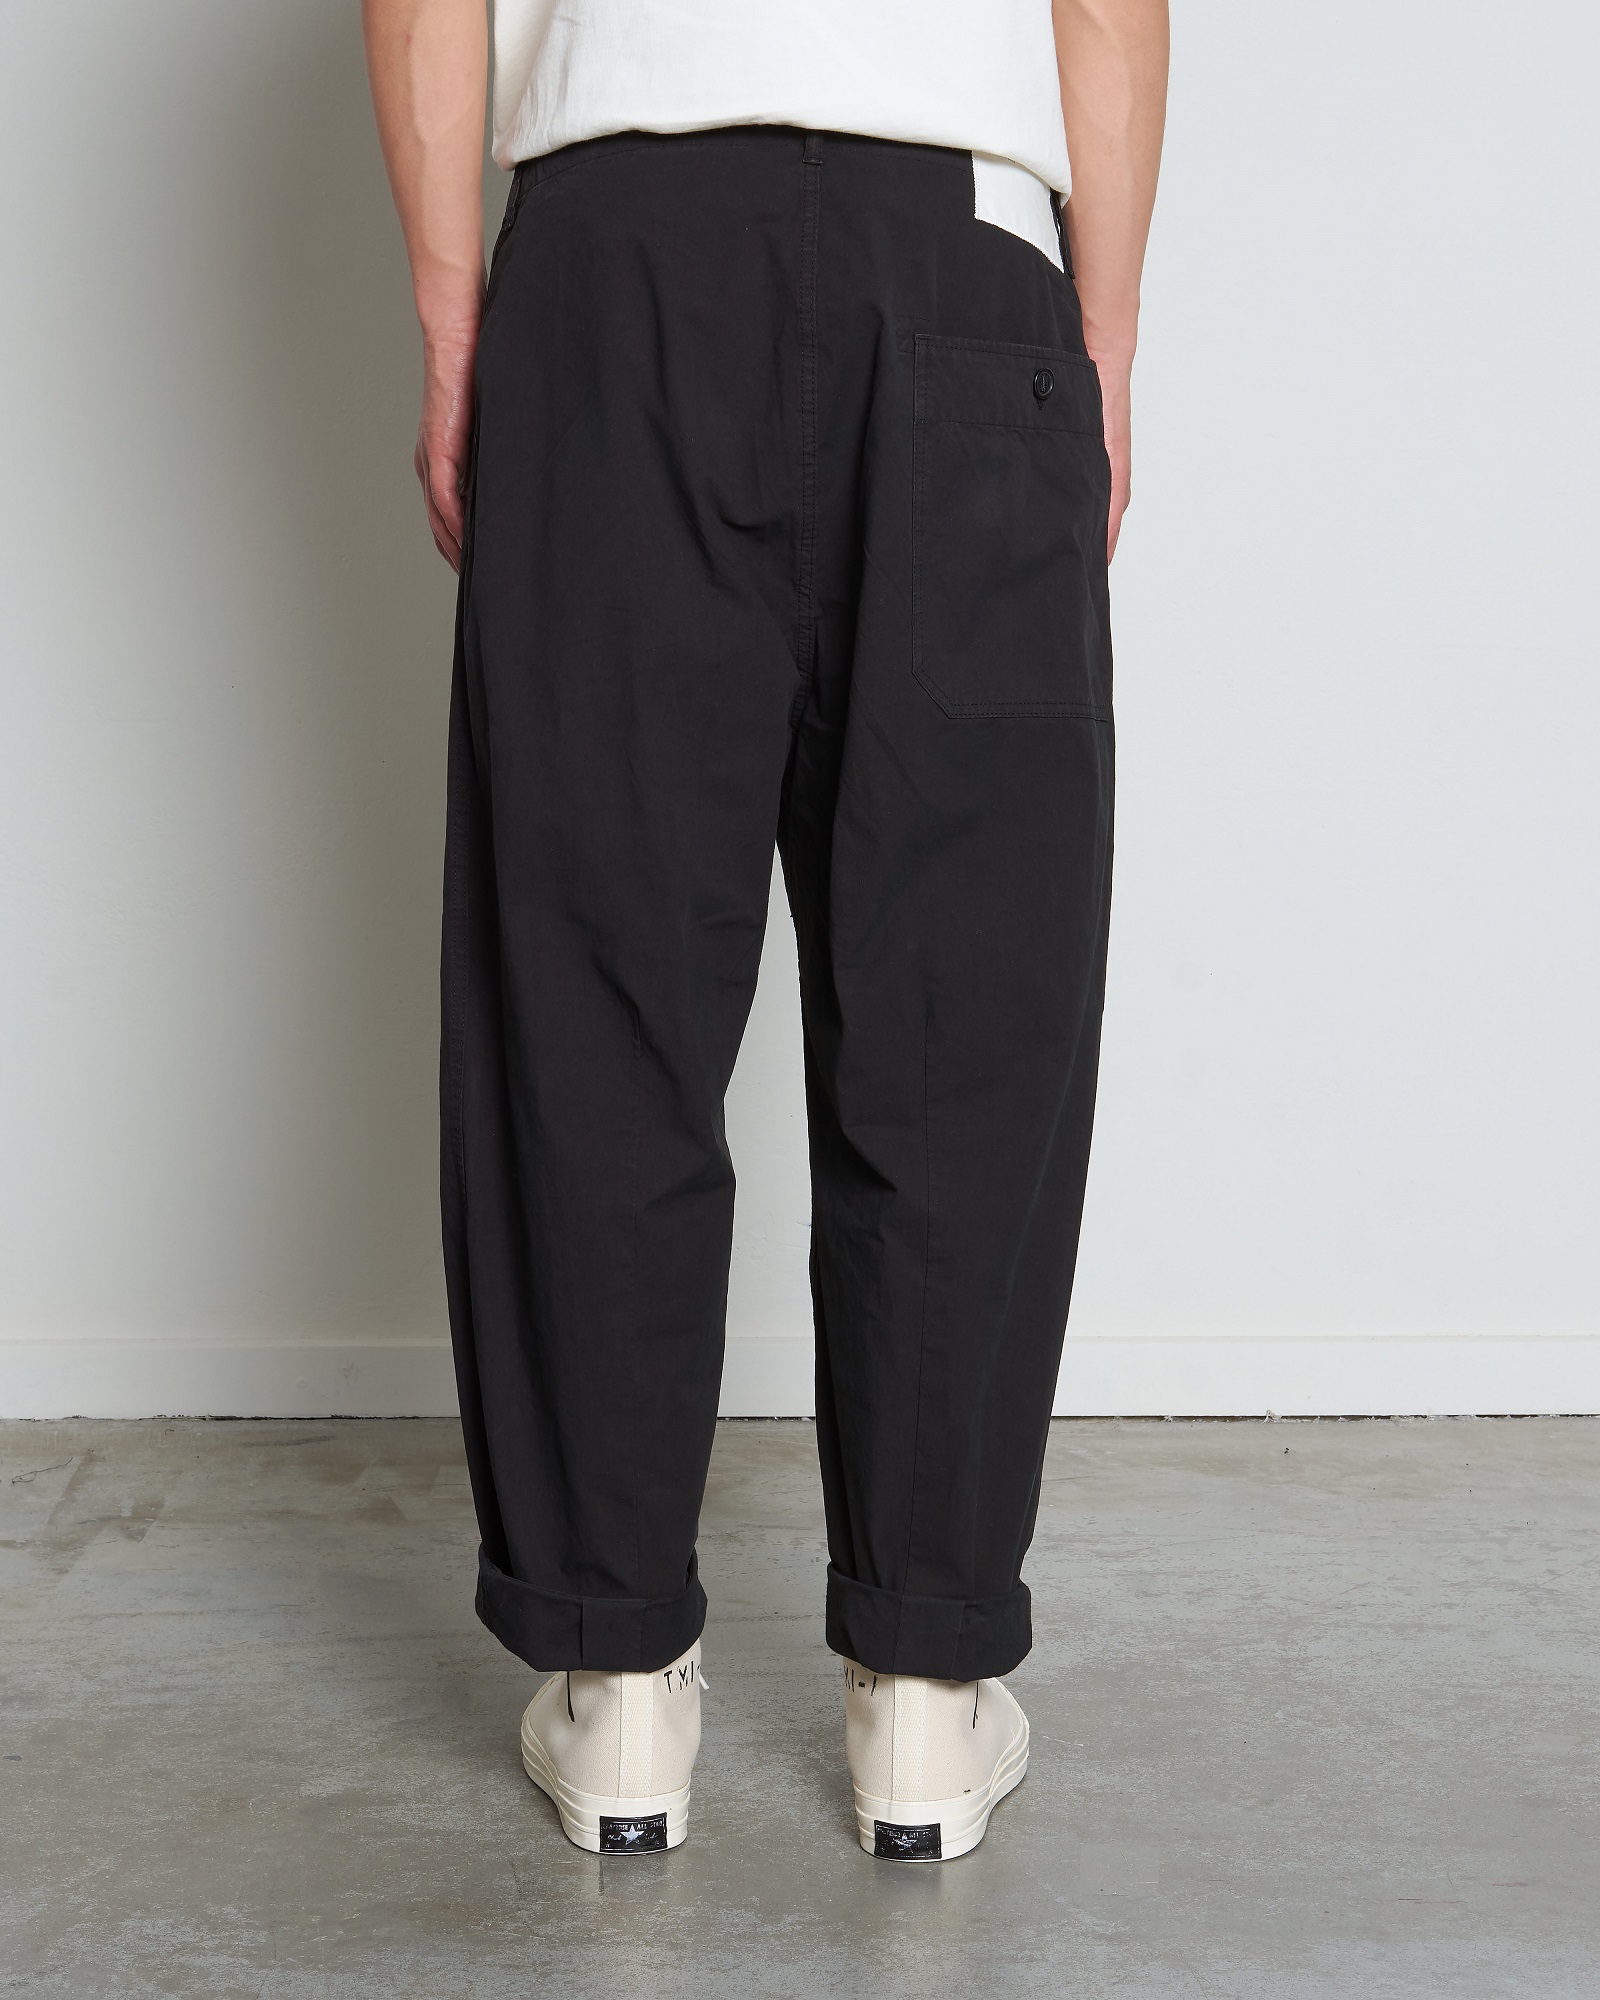 APPLIED ART FORMS Japanese Cargo Pant in Black XL